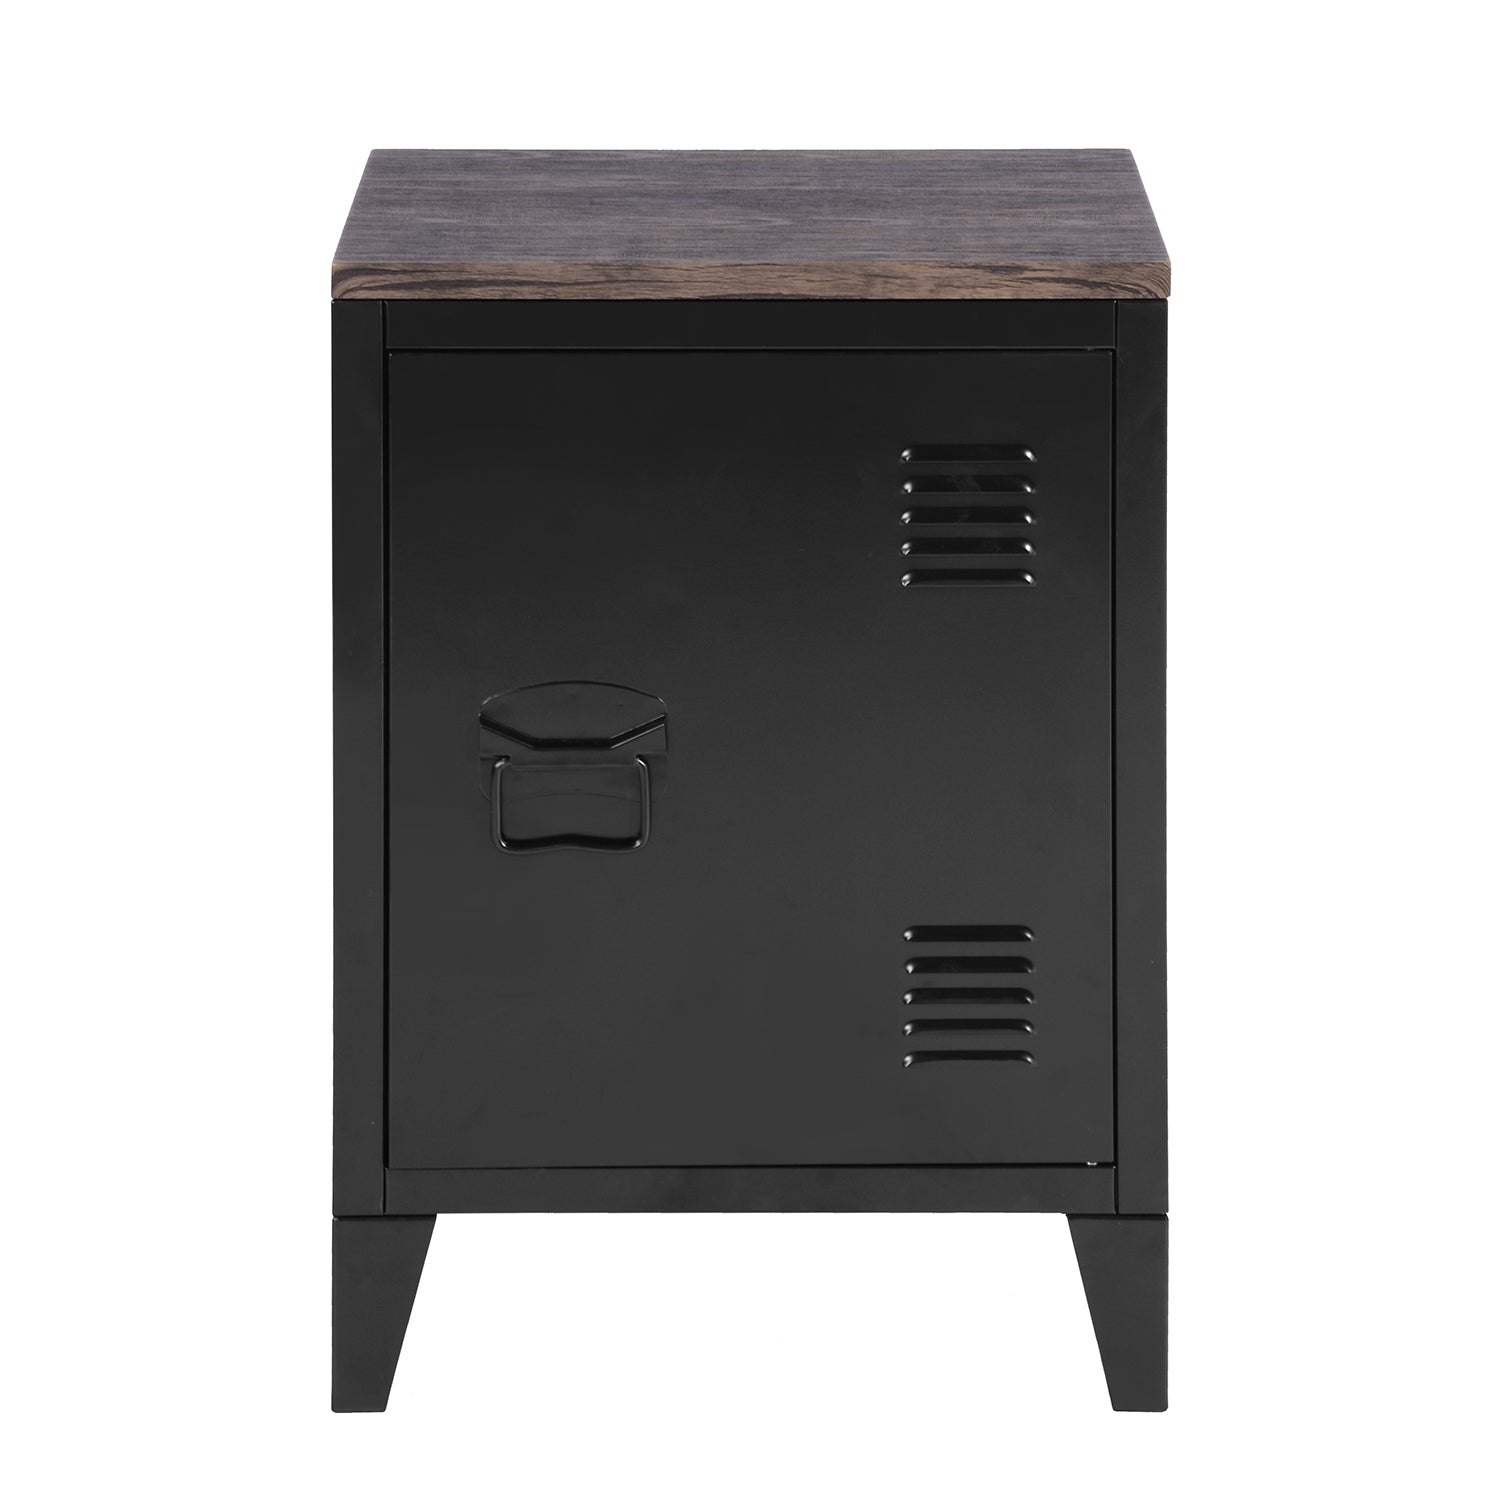 Graves Wooden Top Accent Cabinets